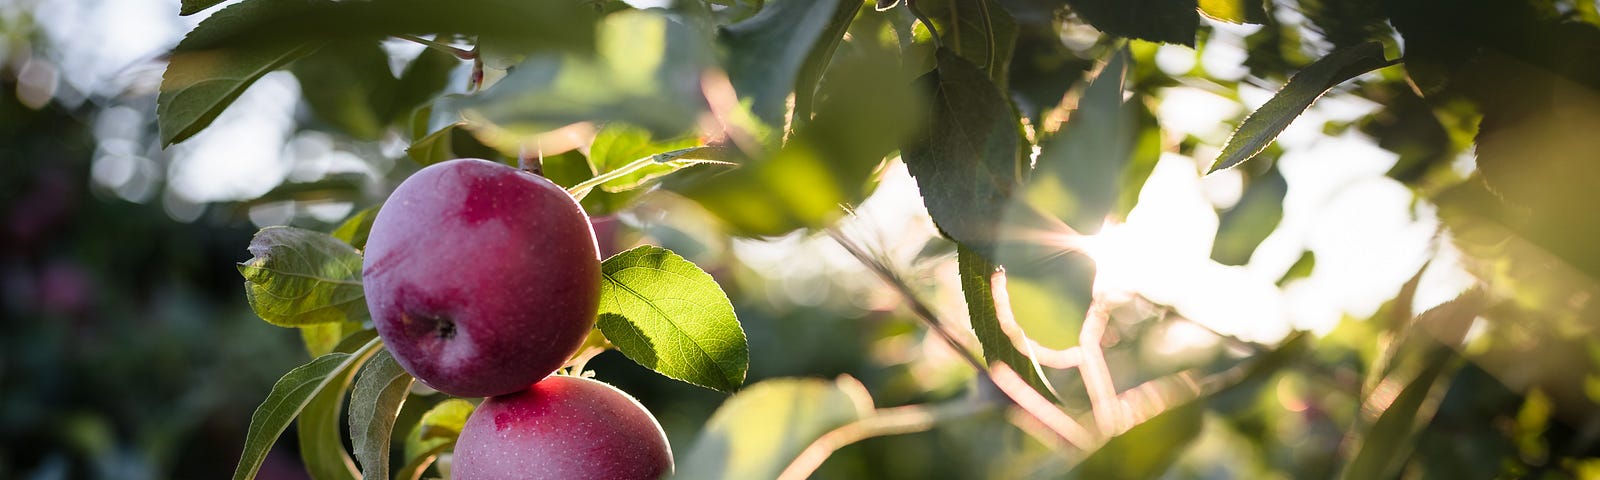 Sunlight shines through the leaves of an apple tree, highlighting two red apples.